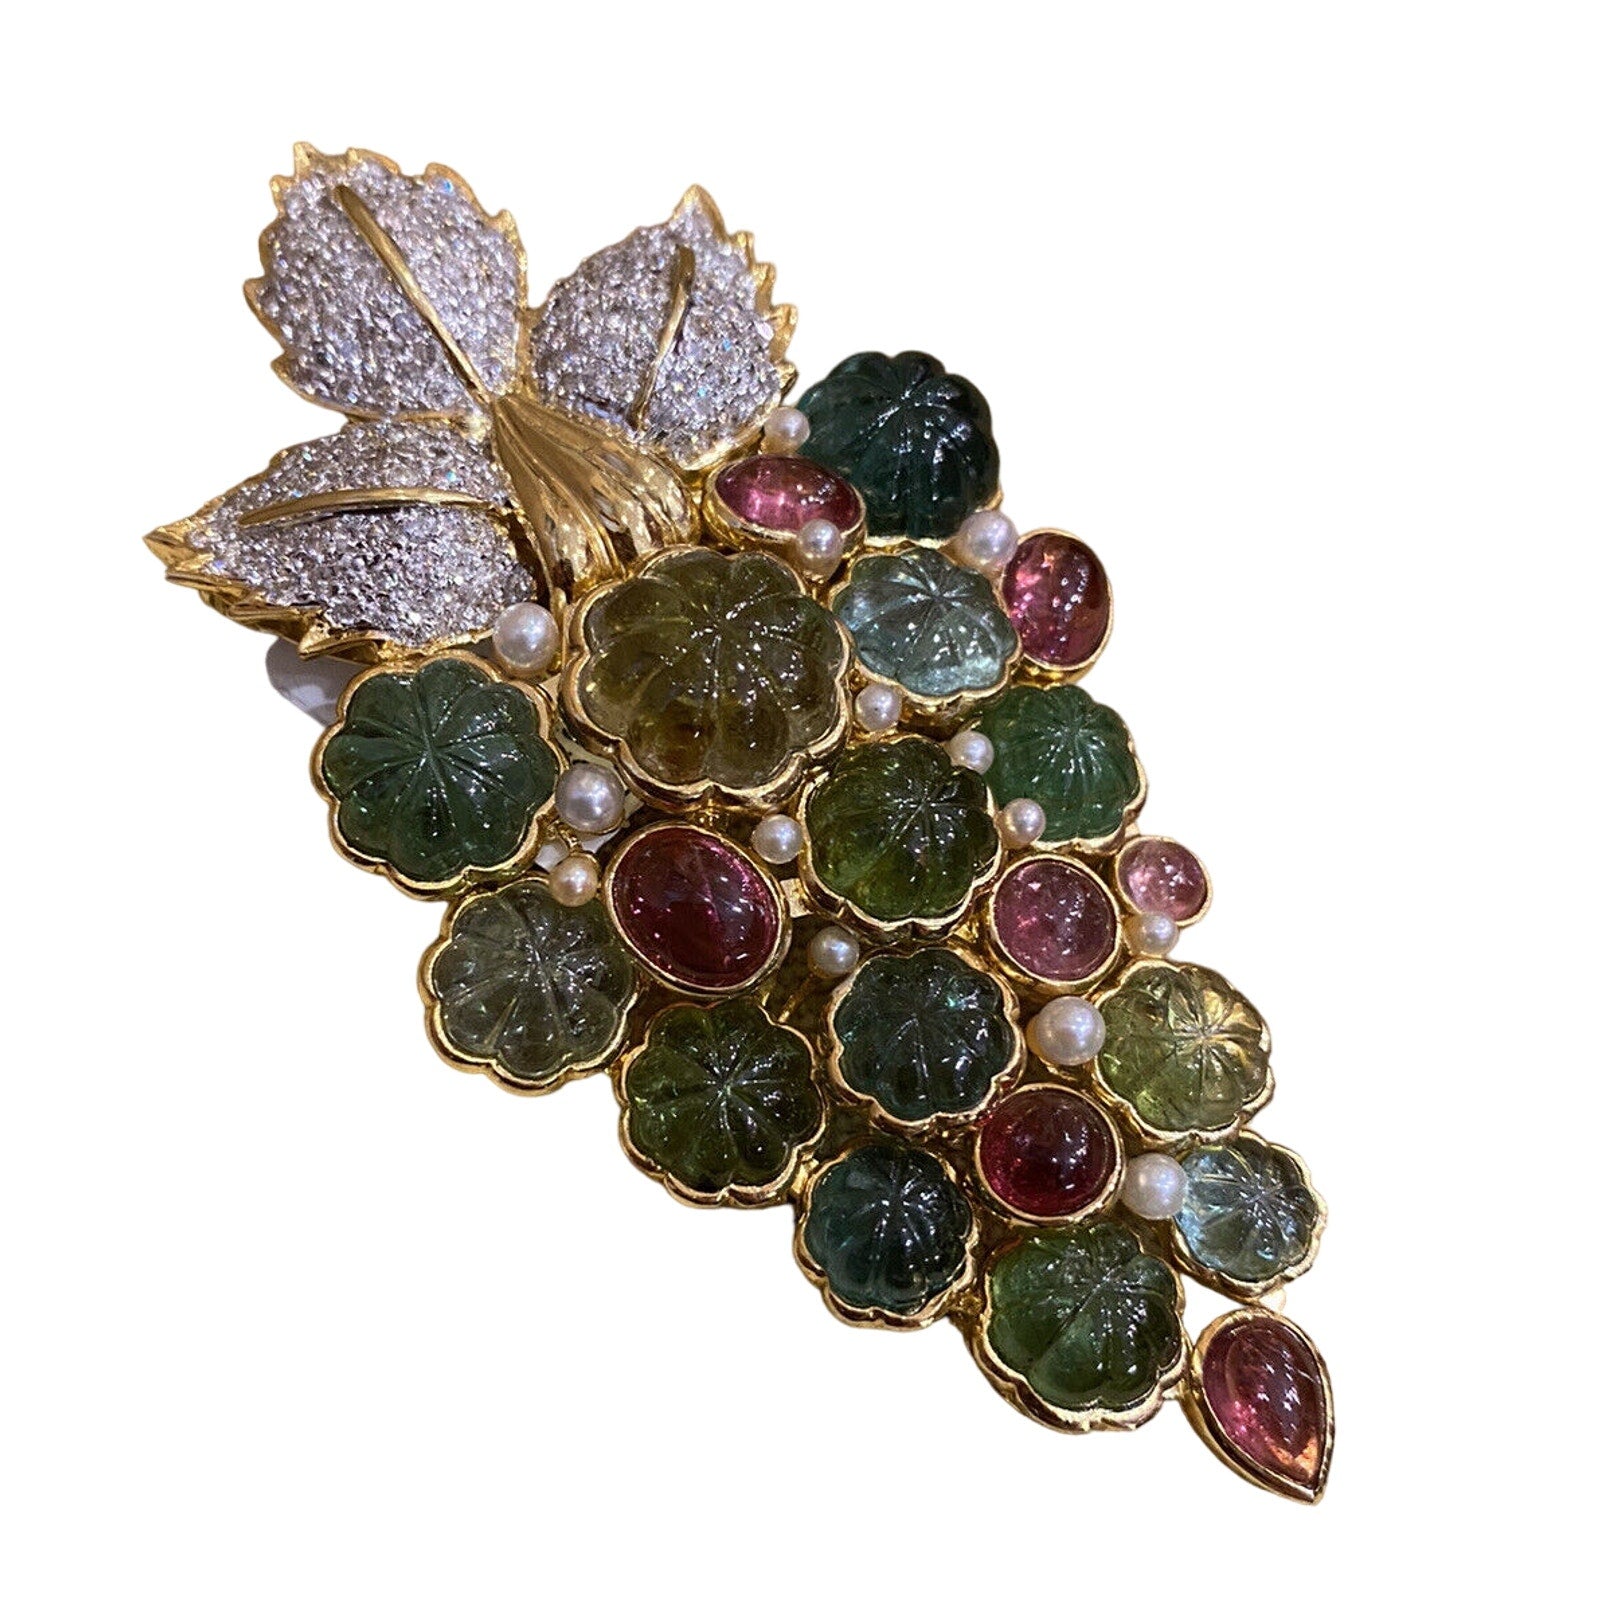 Carved Tourmaline/Topaz Grapes & Diamond Brooch in 18k Yellow Gold -- HM2311AE